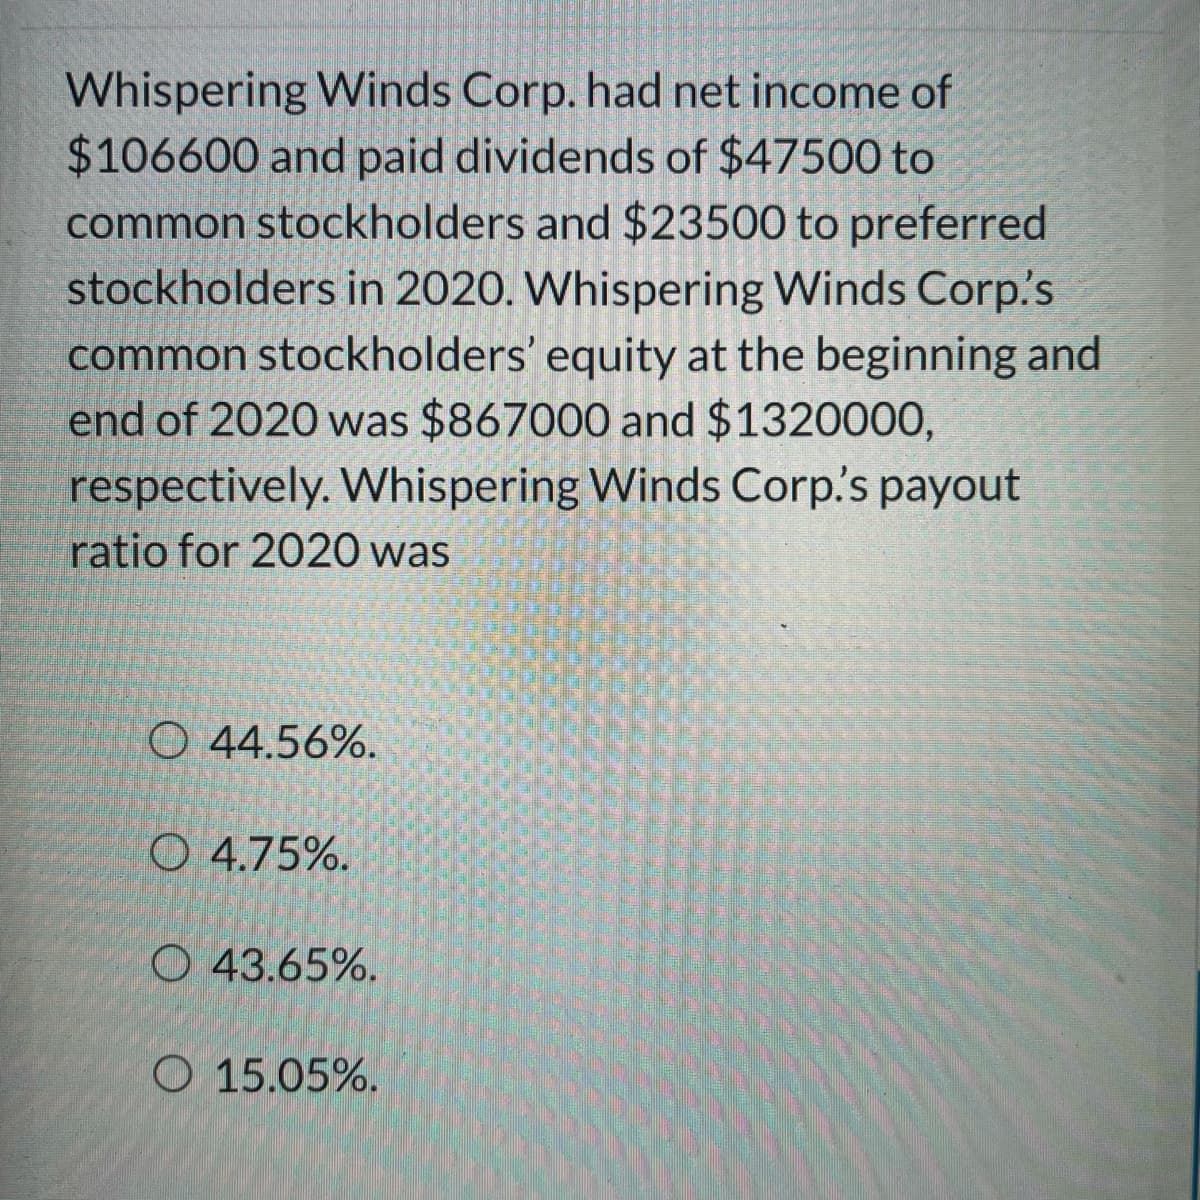 Whispering Winds Corp. had net income of
$106600 and paid dividends of $47500 to
common stockholders and $23500 to preferred
stockholders in 2020. Whispering Winds Corp's
common stockholders' equity at the beginning and
end of 2020 was $867000 and $1320000,
respectively. Whispering Winds Corp's payout
ratio for 2020 was
O 44.56%.
O 4.75%.
O 43.65%.
O 15.05%.
